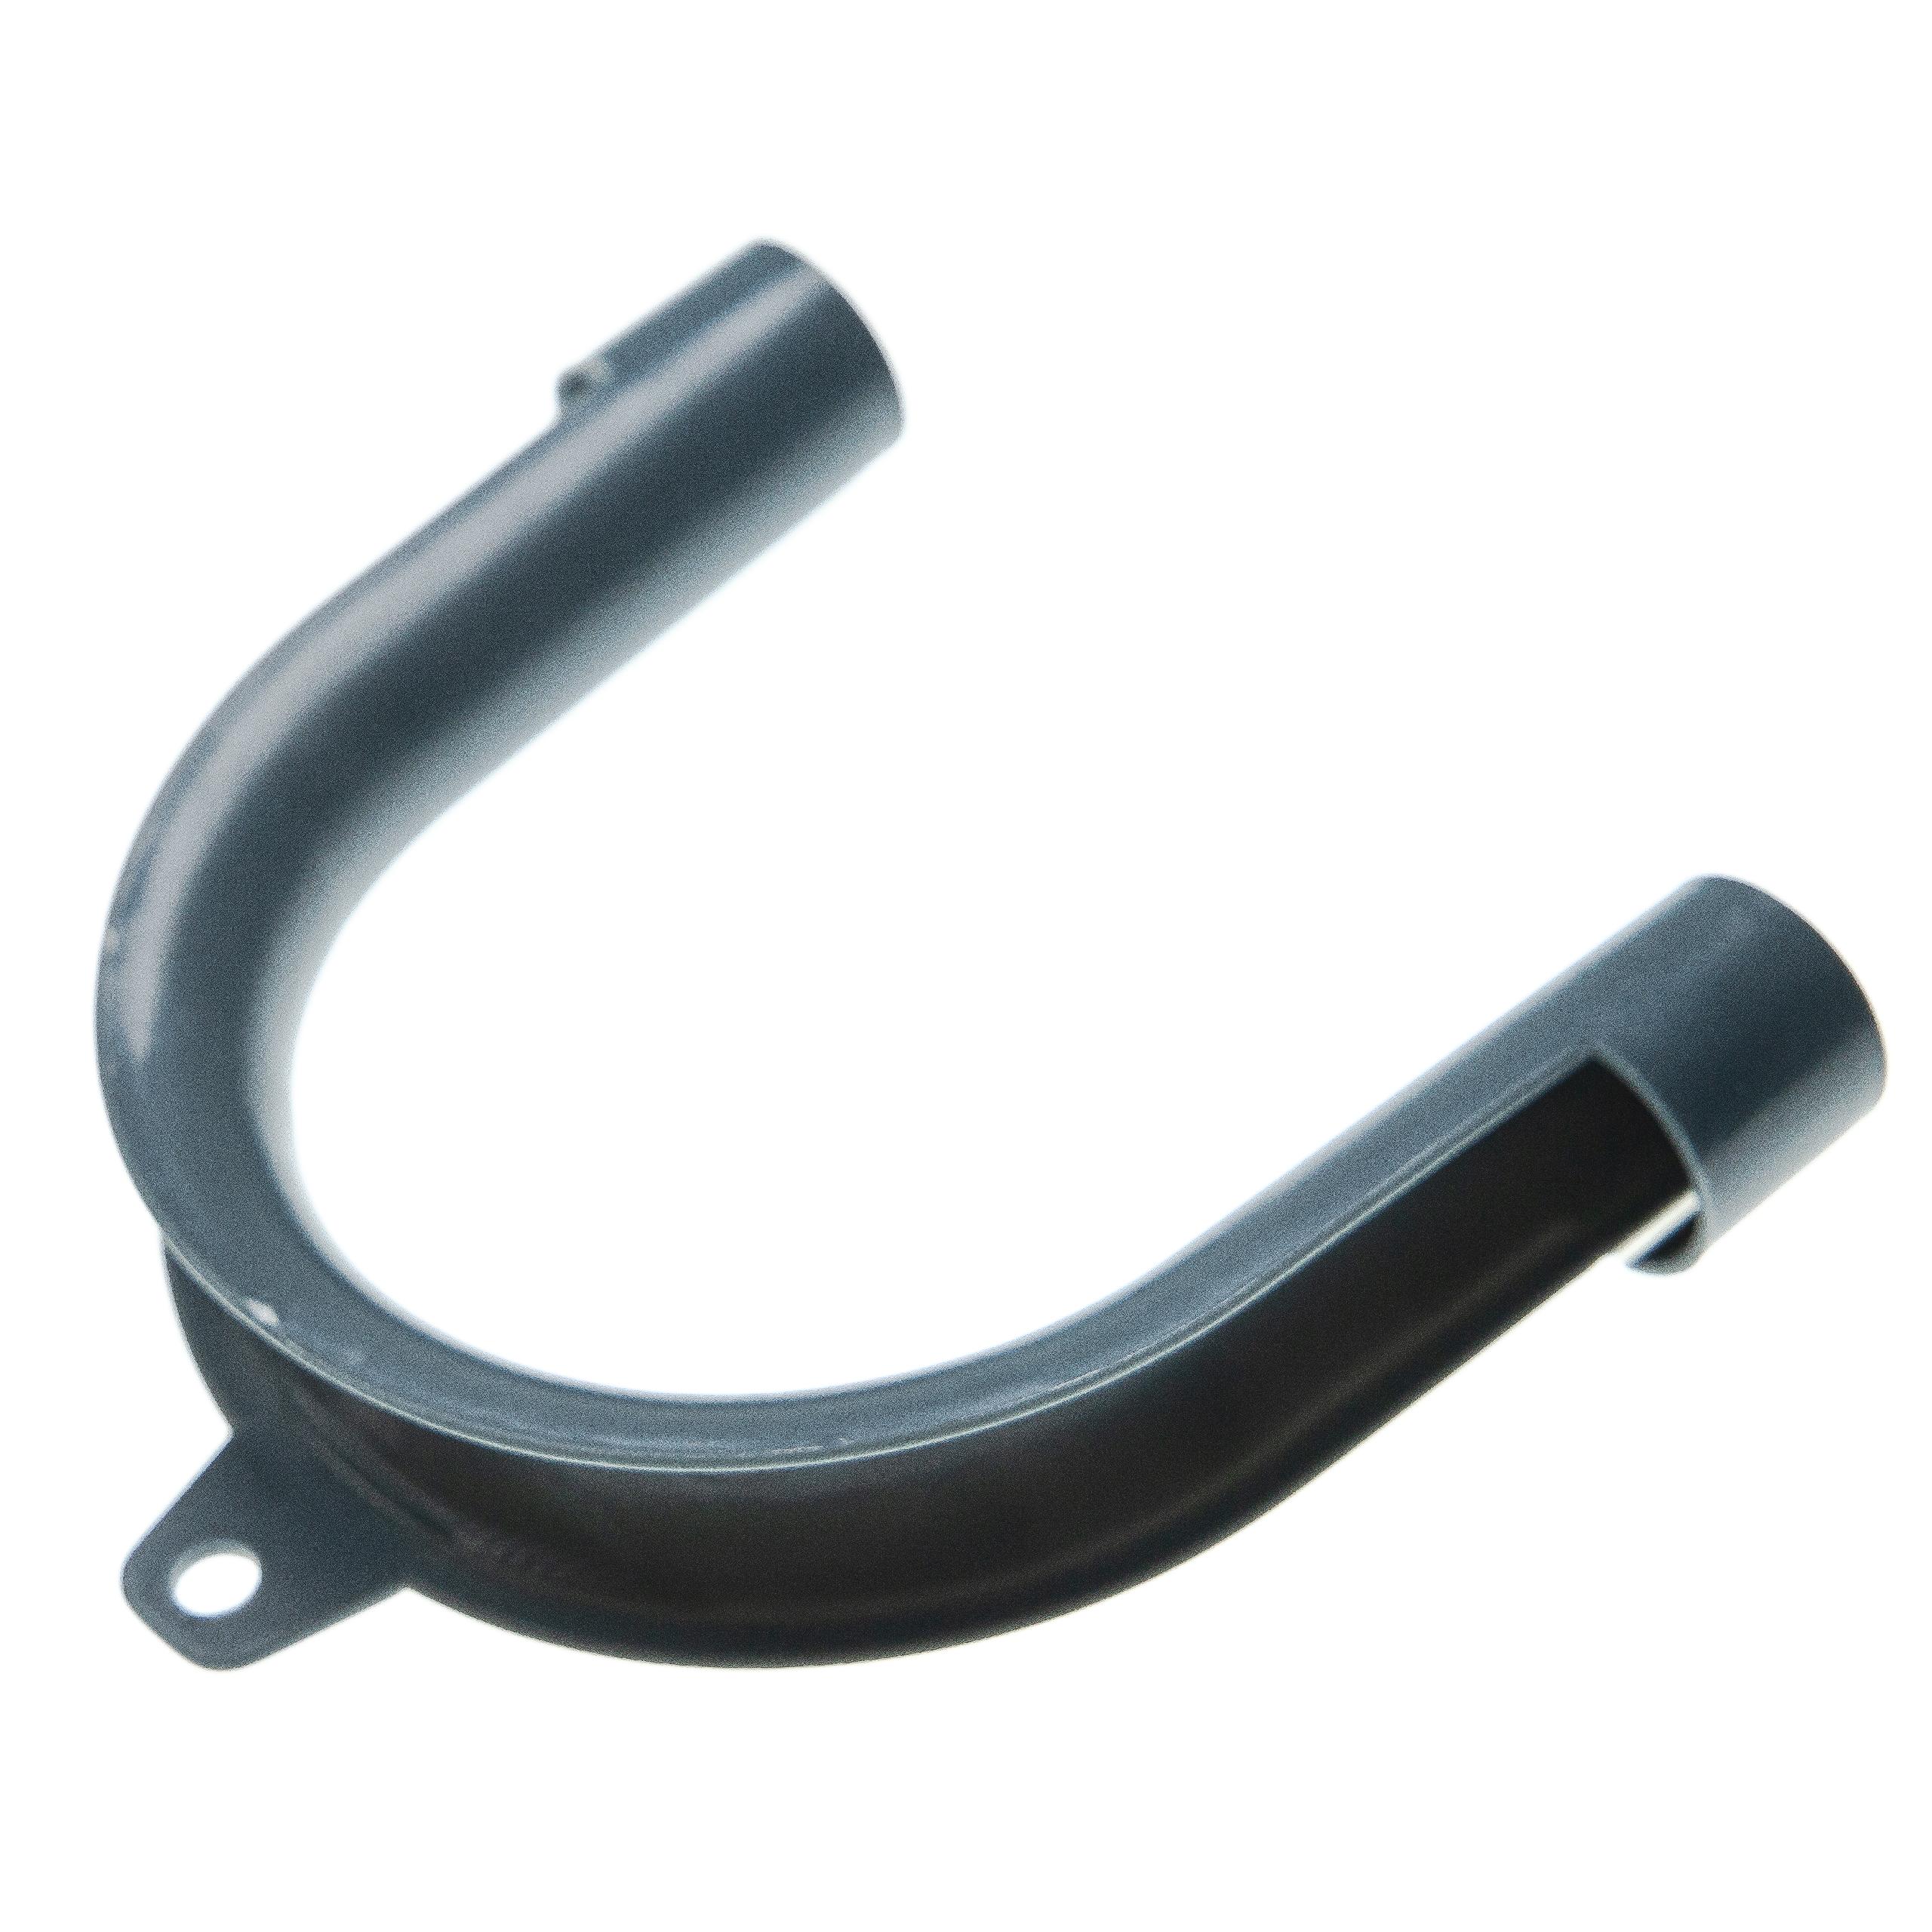 Drain Hose compatible with most Washing Machines - 22/29mm Right Angle Connection, Grey